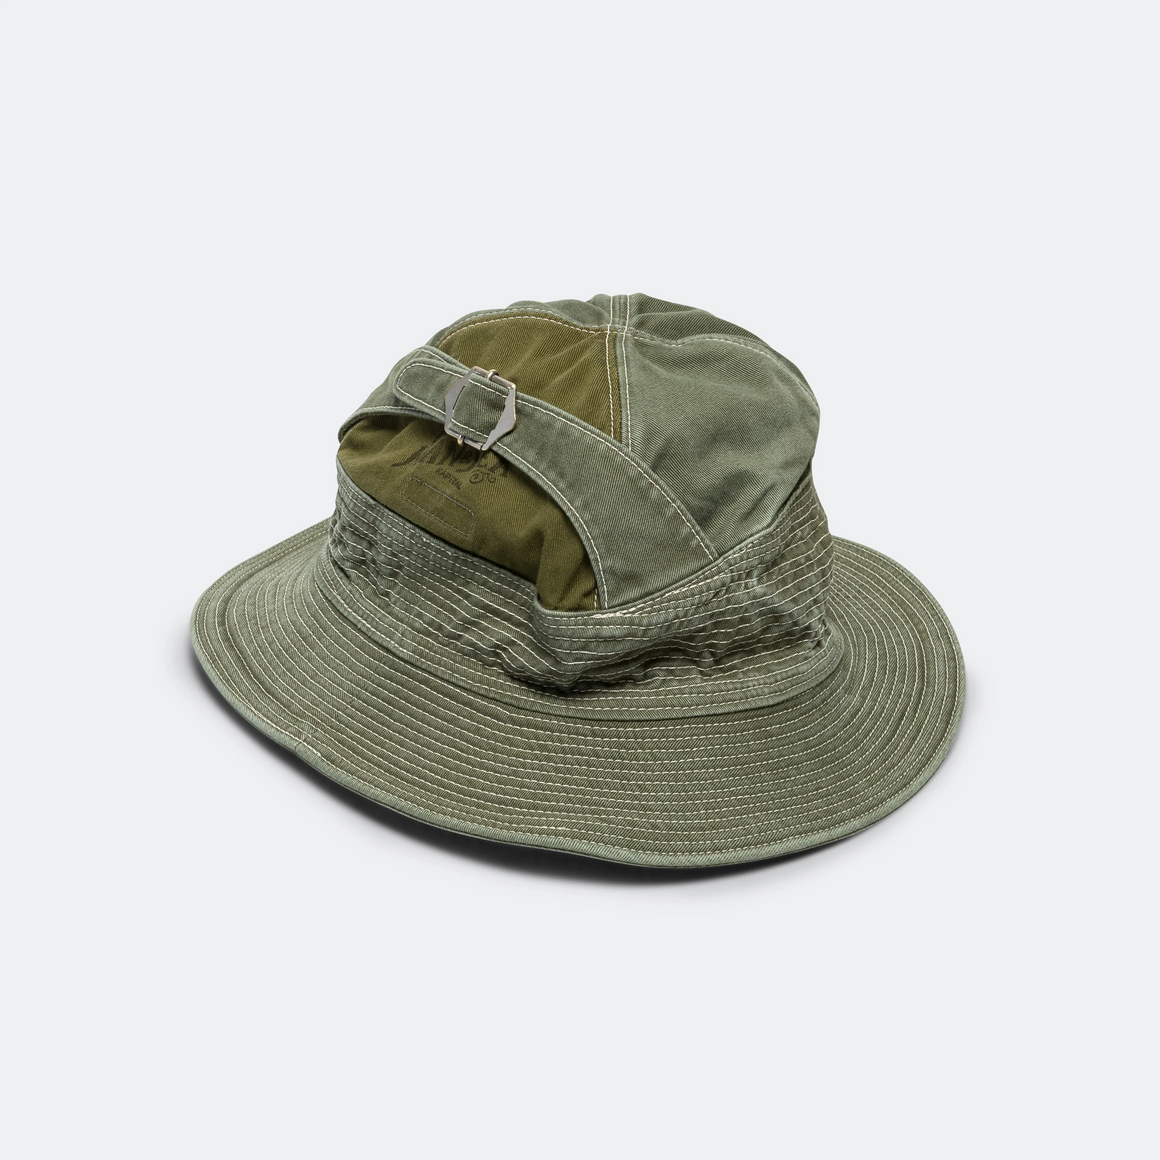 Chino THE OLD MAN AND THE SEA Hat - Khaki